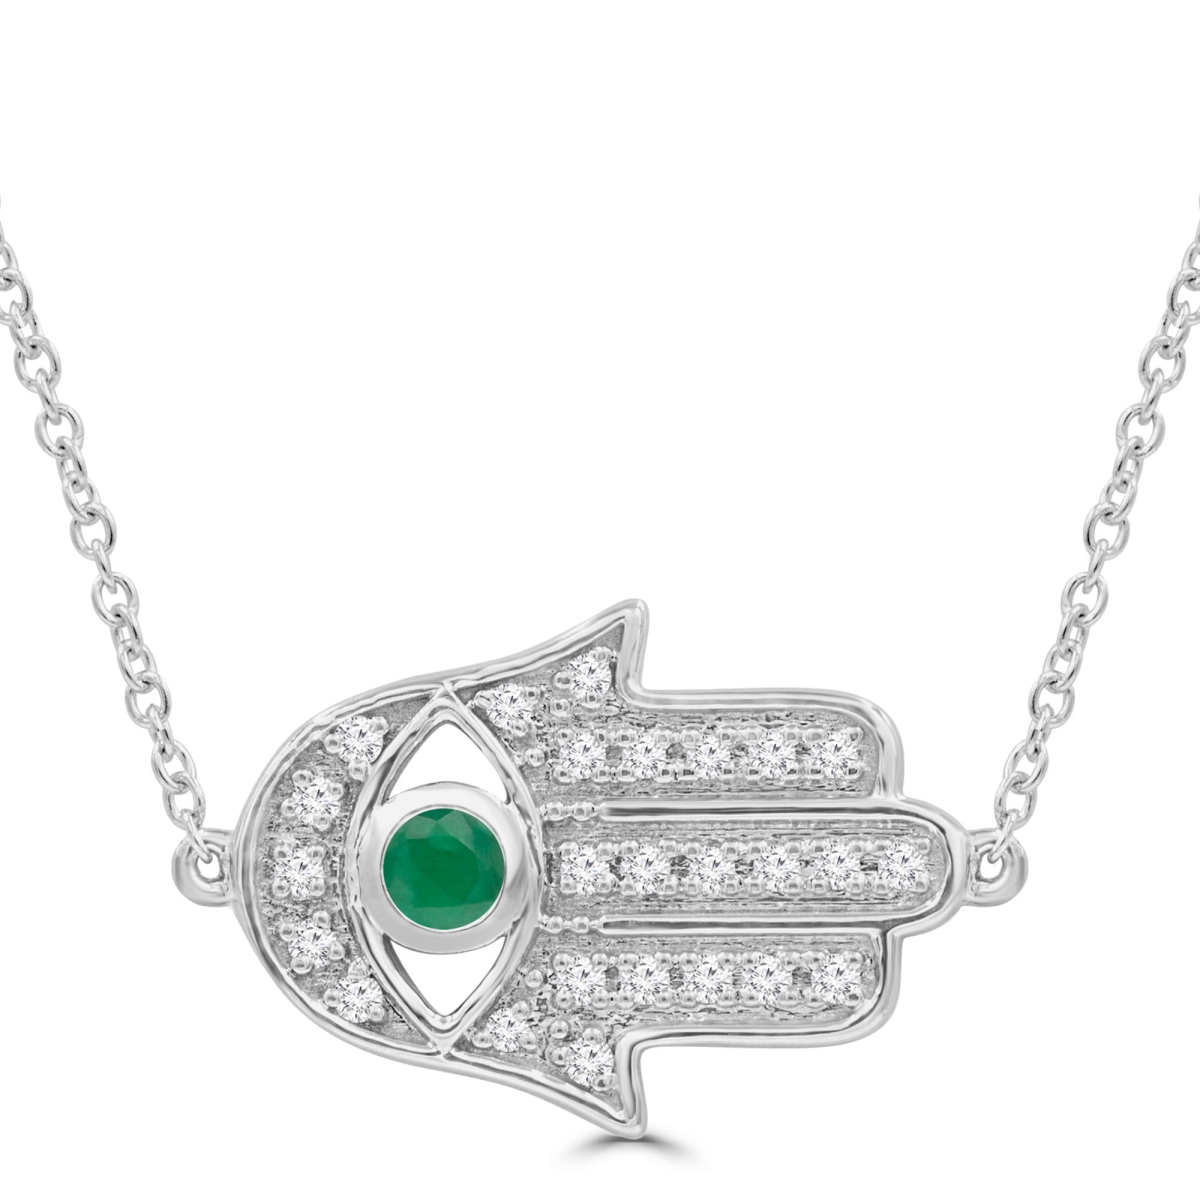 Picture of Majesty Diamonds MDR220170 0.25 CTW Round Green Emerald Hamsa Necklace in 14K White Gold